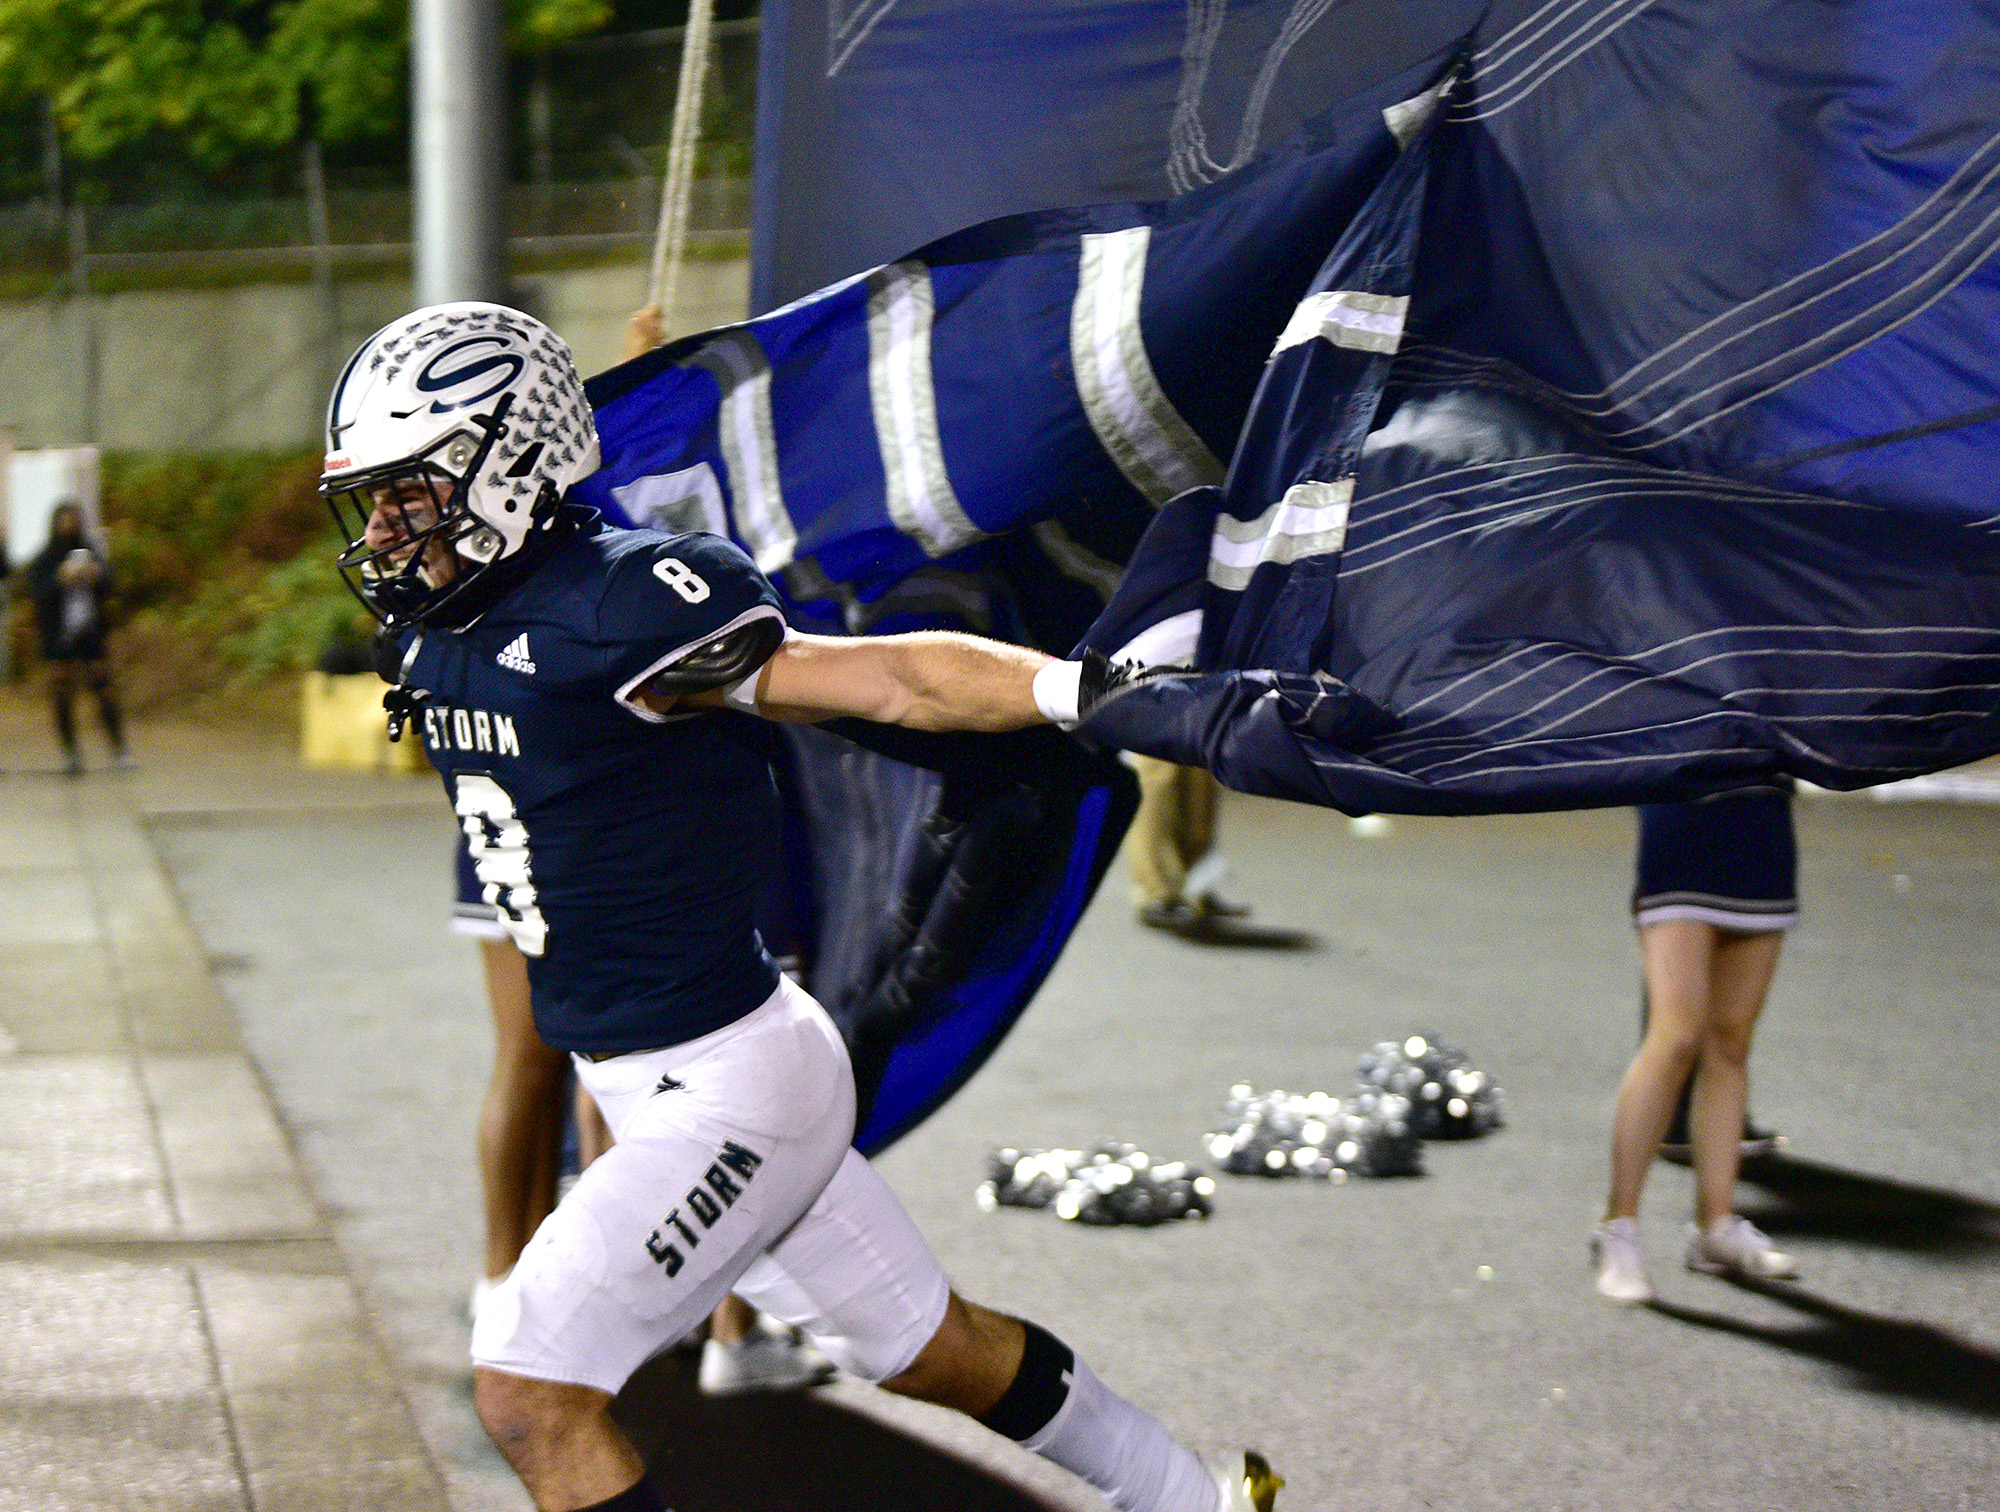 Skyview senior Jaydin Knapp bursts through a banner Thursday, Oct. 14, 2021, at the start of the game between Union and Skyview at the Kiggins Bowl in Vancouver.